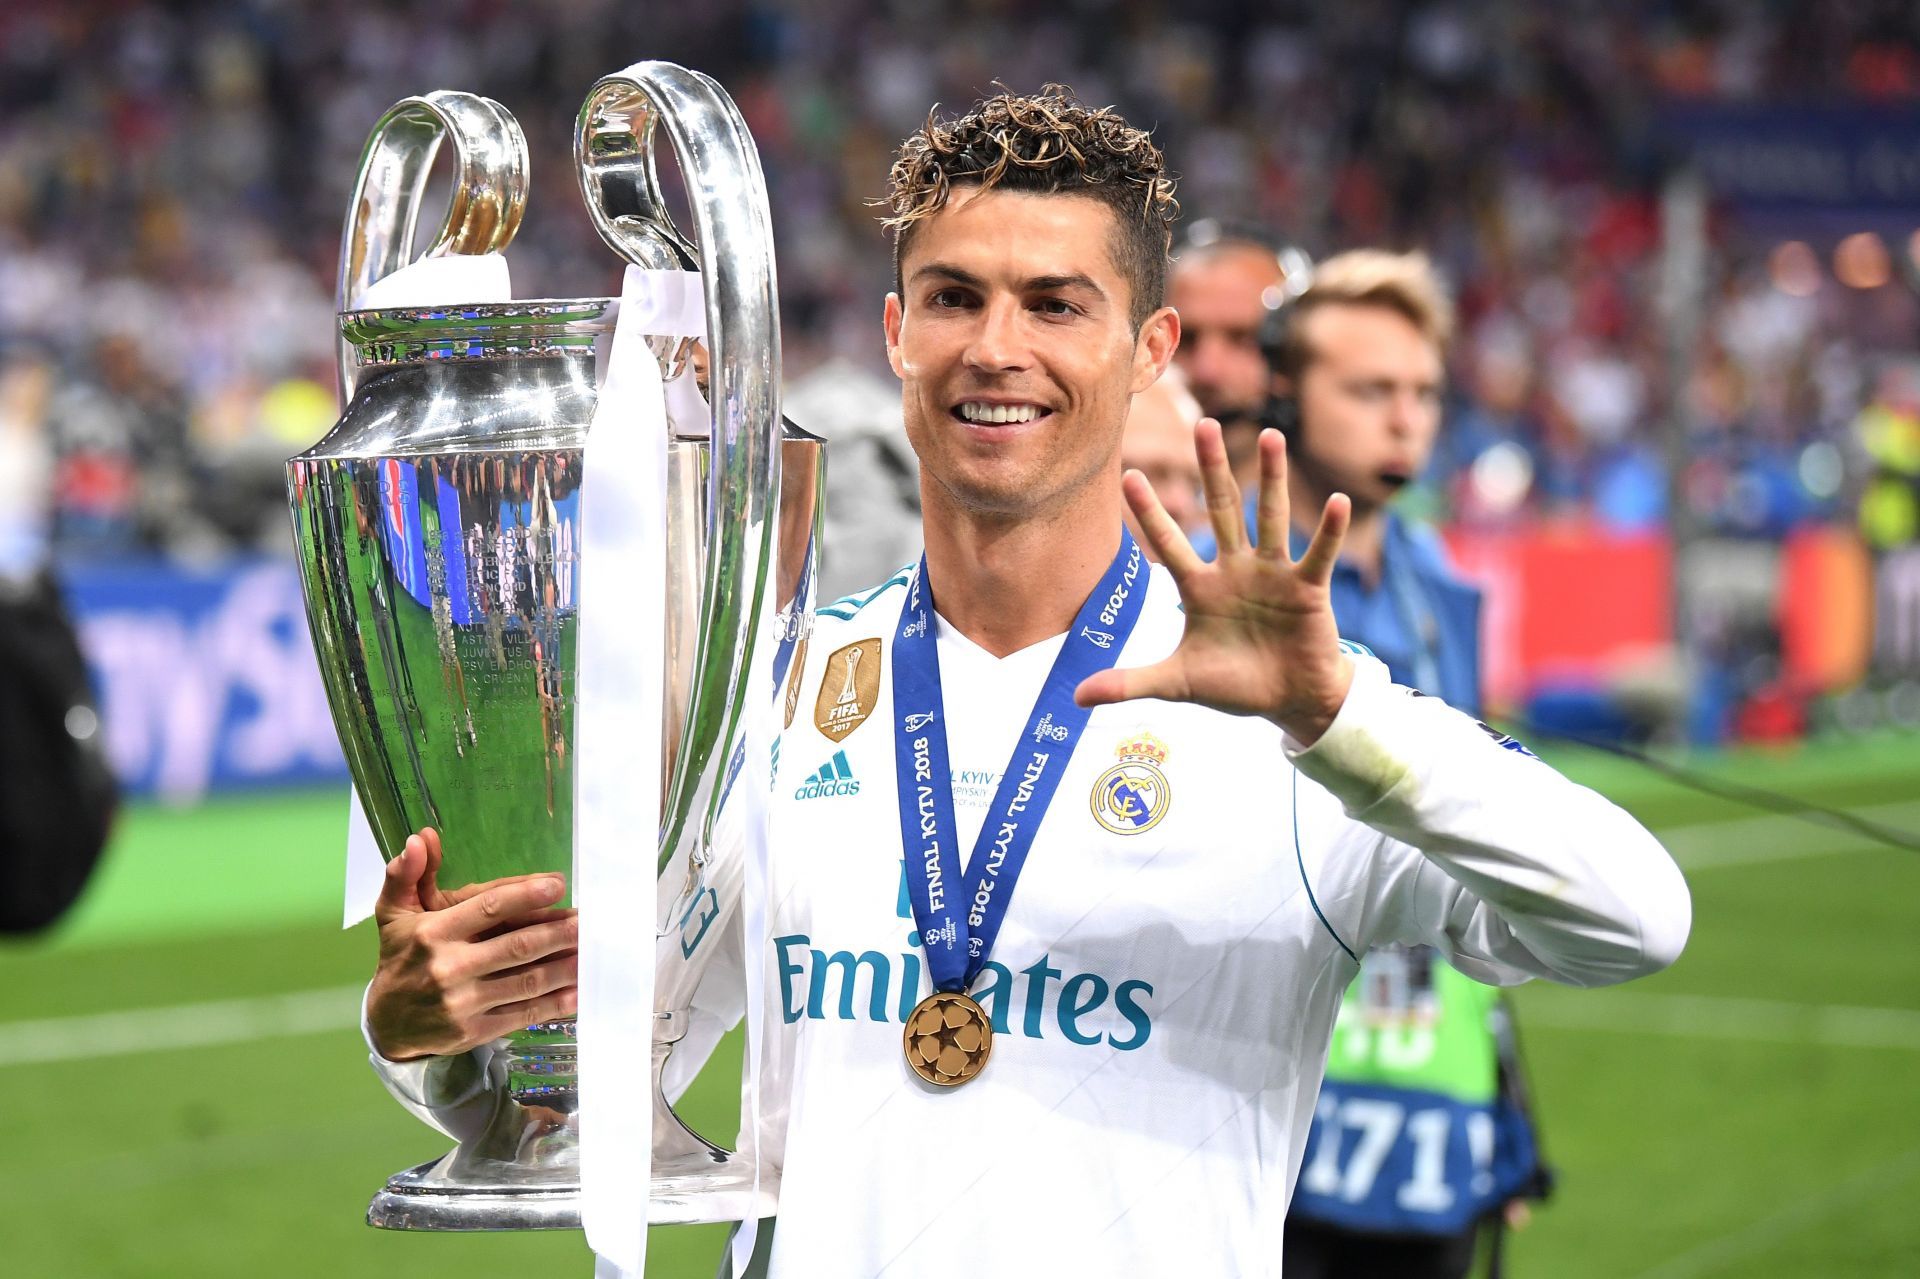 Ronaldo has lifted the UEFA Champions League five times in his career